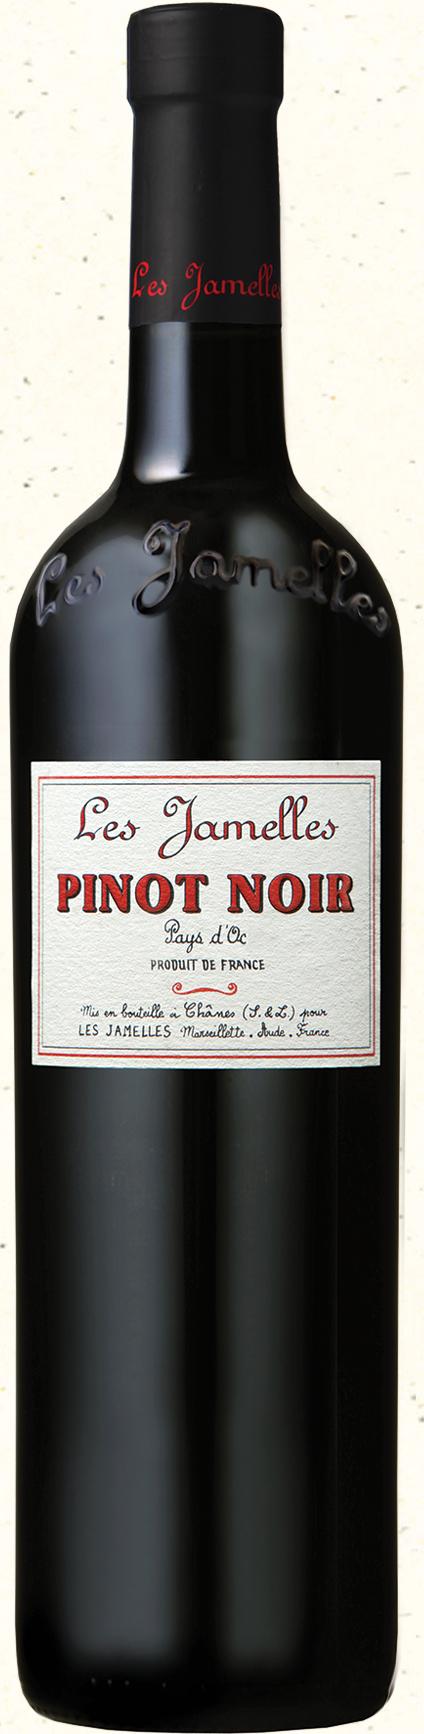 Pinot Noir Vin de Pays d'oc This is another example of the way in which Catherine Delaunay has transferred her family know-how to the South of France.